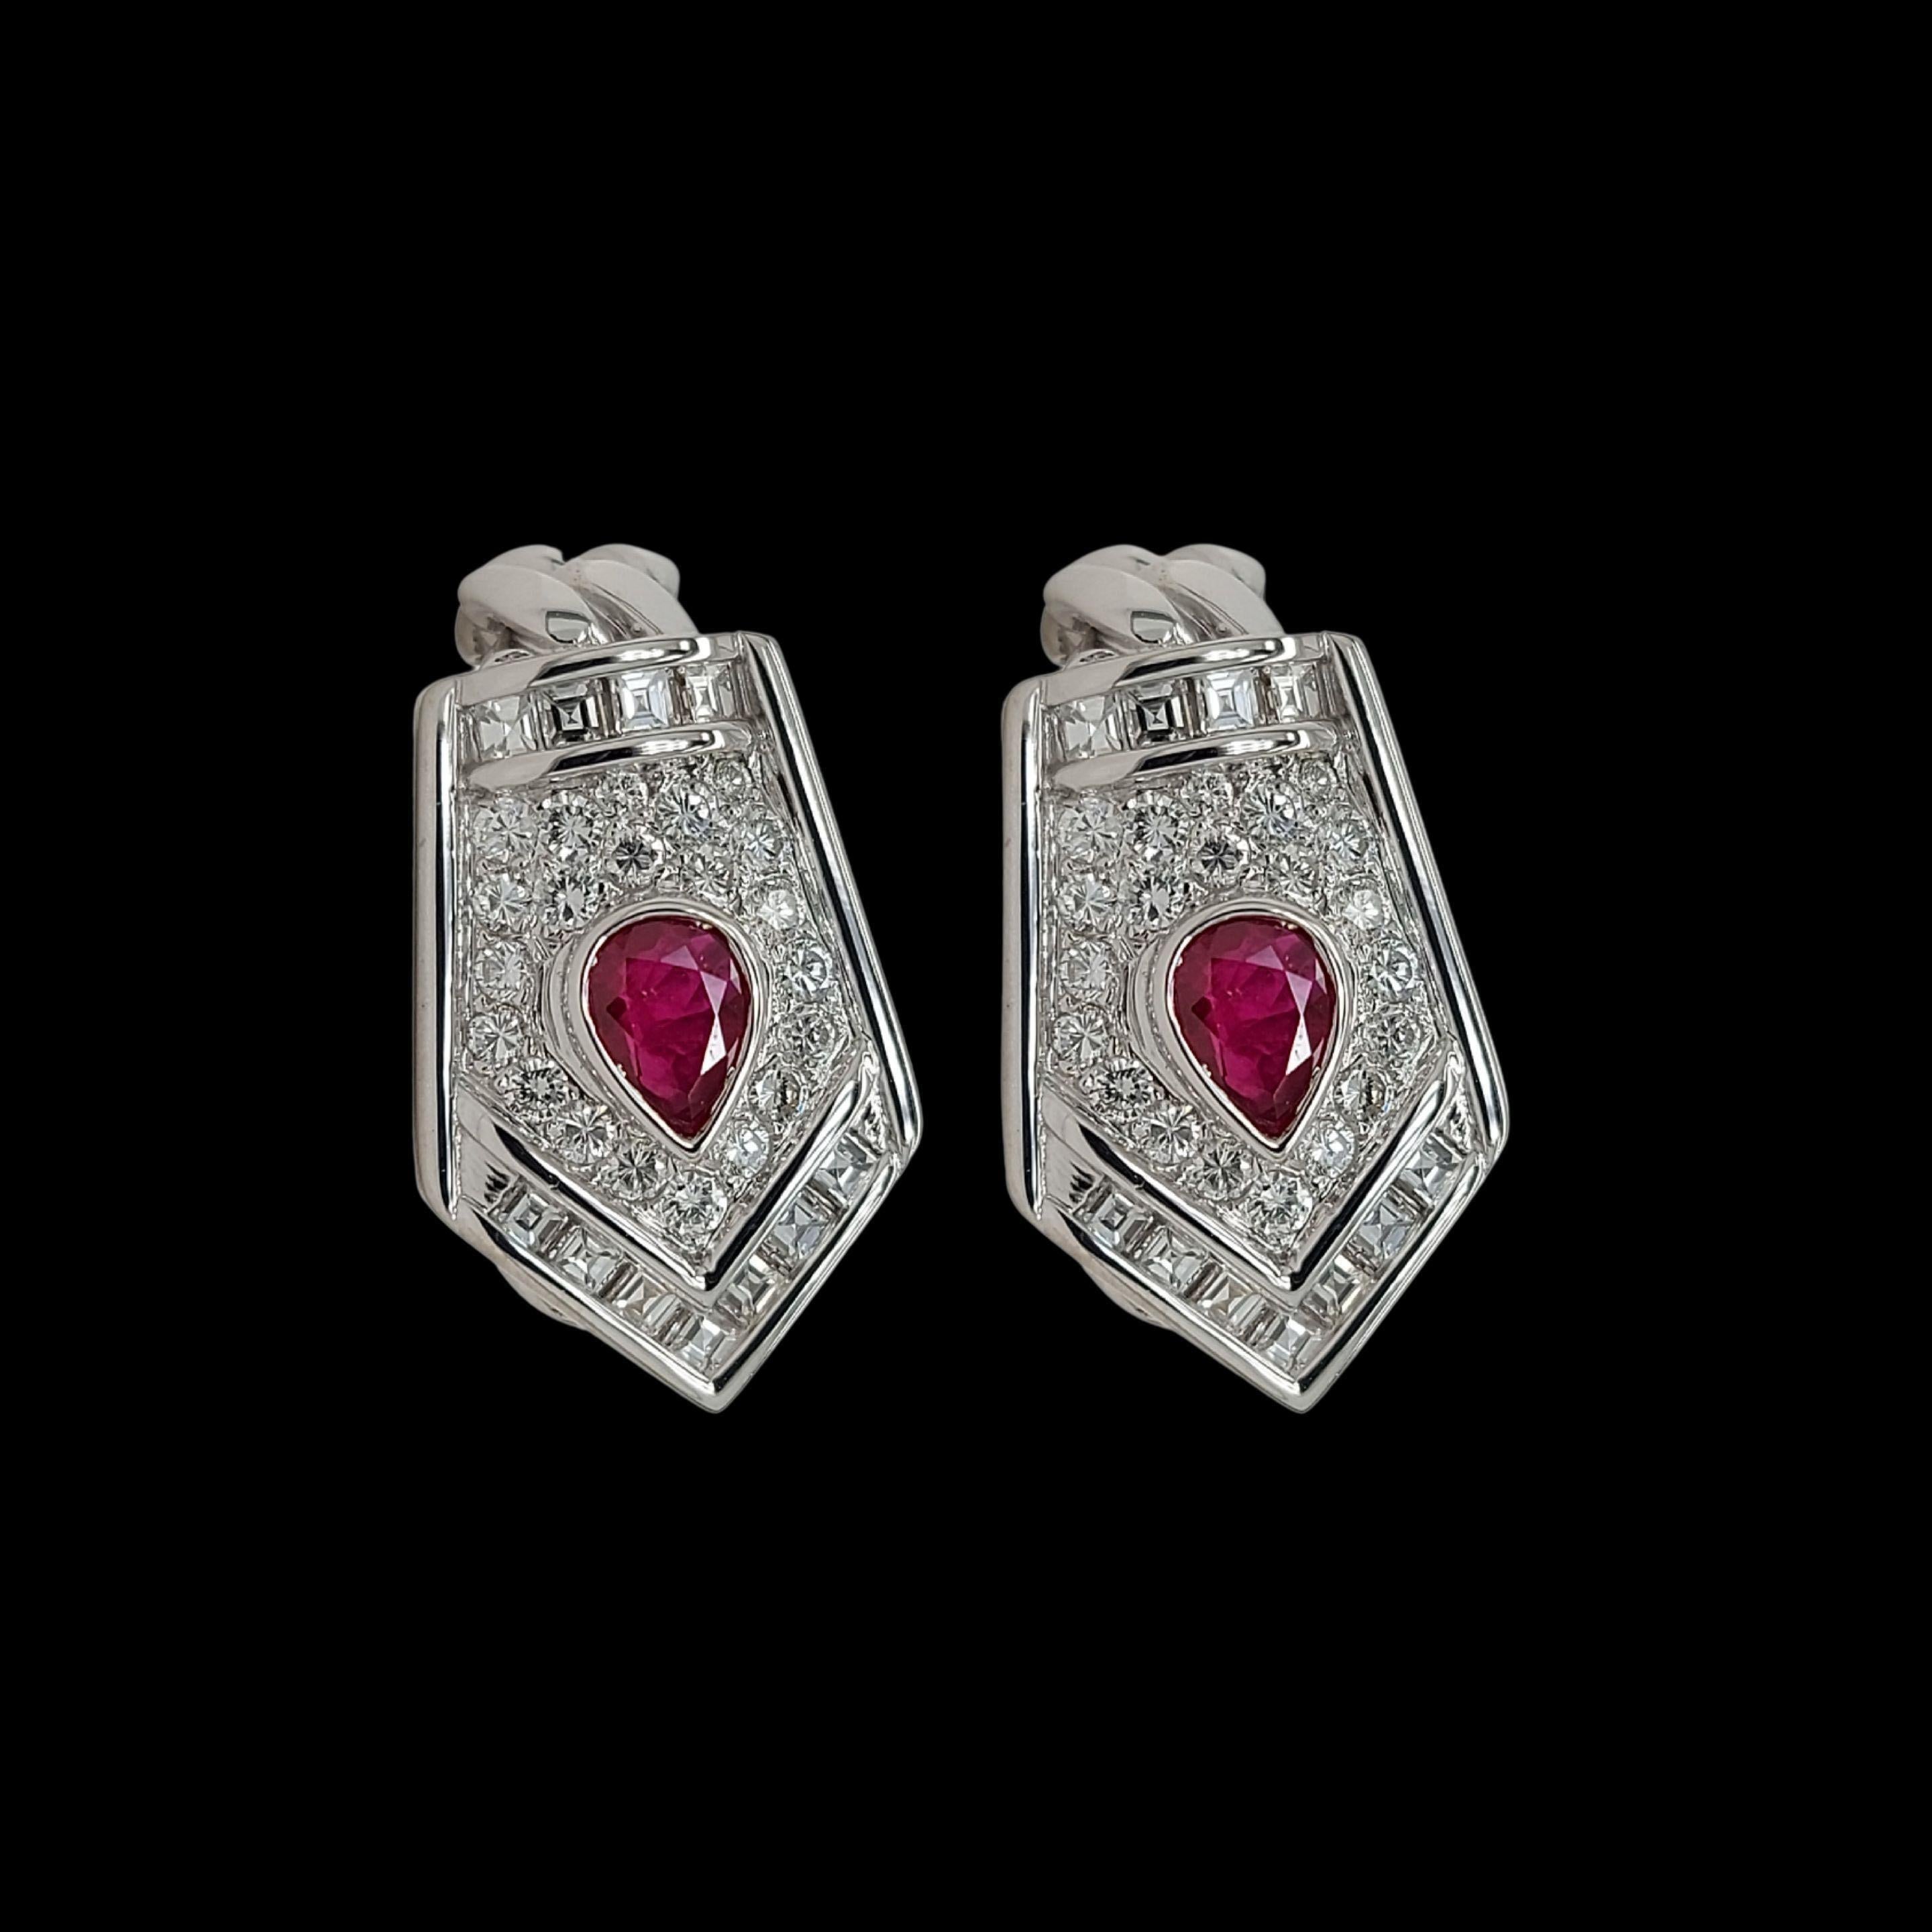 Gorgeous 18kt White Gold Clip-On Earrings With Pear Shape Ruby and Diamonds 

Diamonds: 12 square cut 
20 brilliant cut diamonds, together 0.4ct

Ruby: pear shape ruby

Material: 18kt White Gold

Total weight: 11.6 gram / 0.410 oz / 7.5